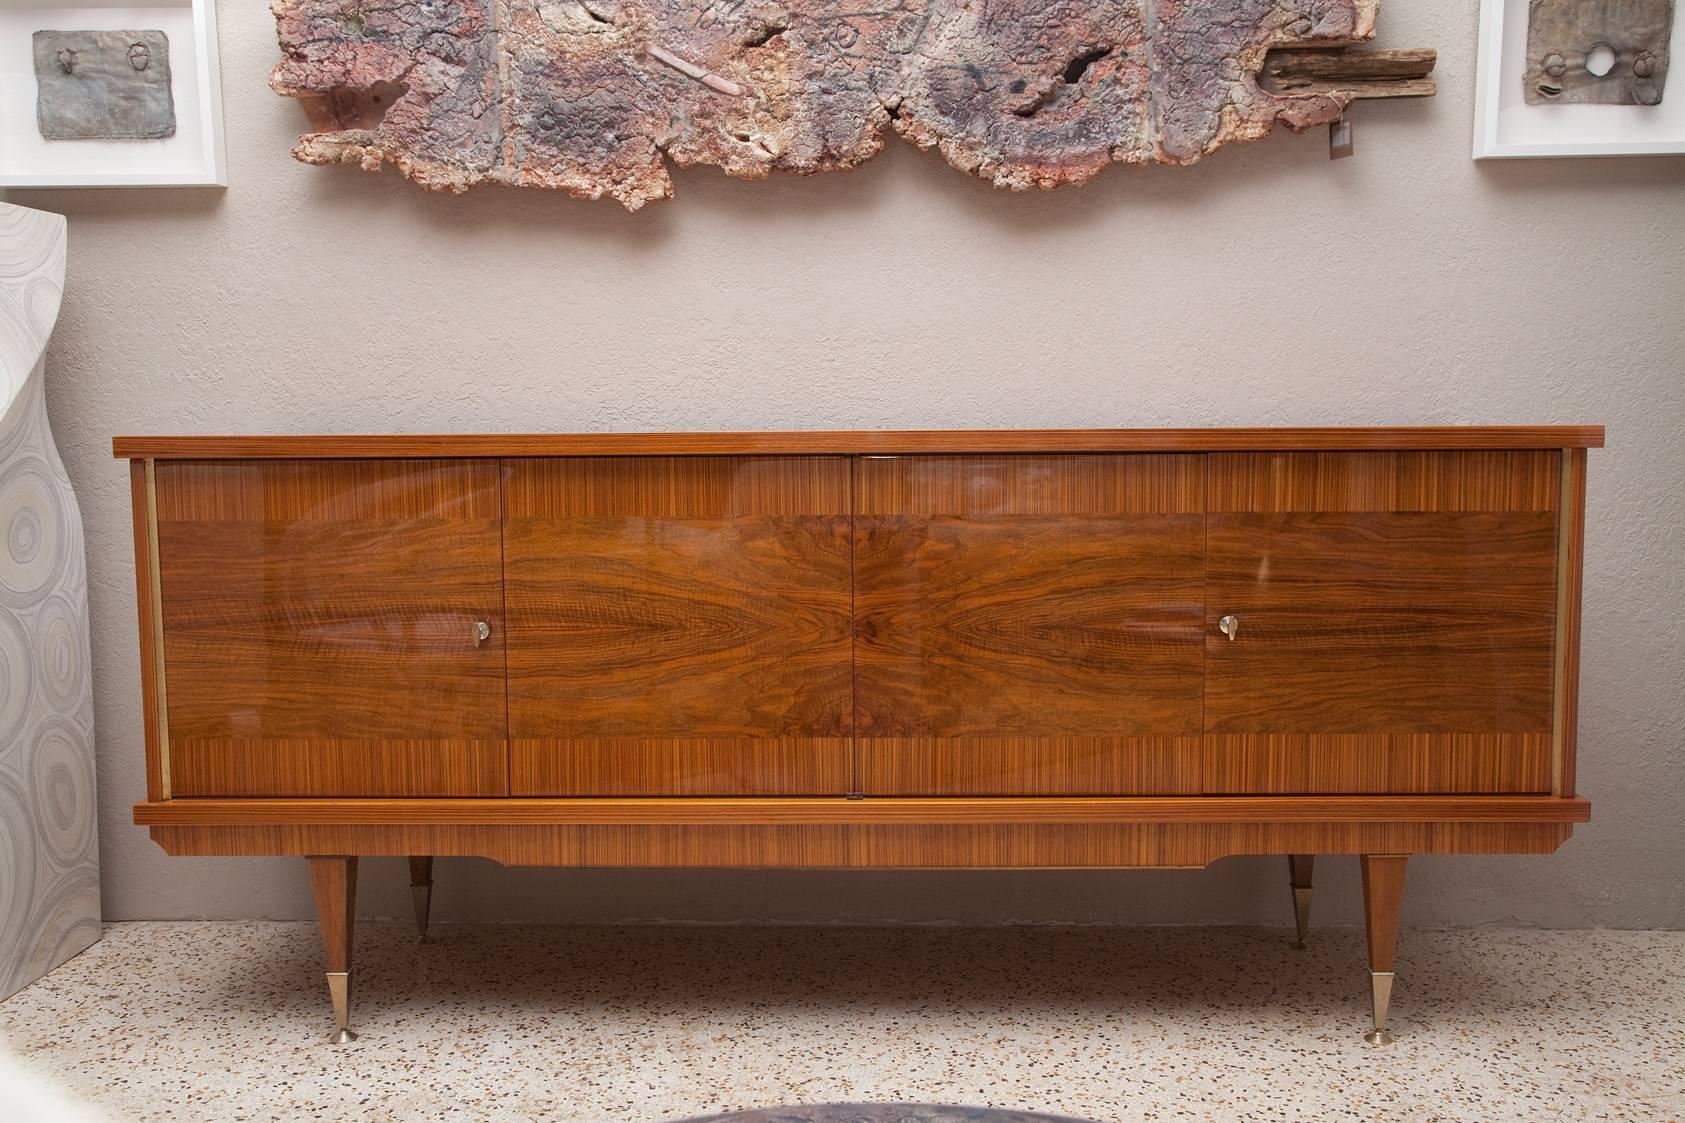 Dramatic 1960s French credenza in lacquered Zebra wood and burl walnut veneers. Sycamore interior with two wood shelves and one smoked glass shelf. Original, but un-wired interior light and original bronze-finished details and keys.